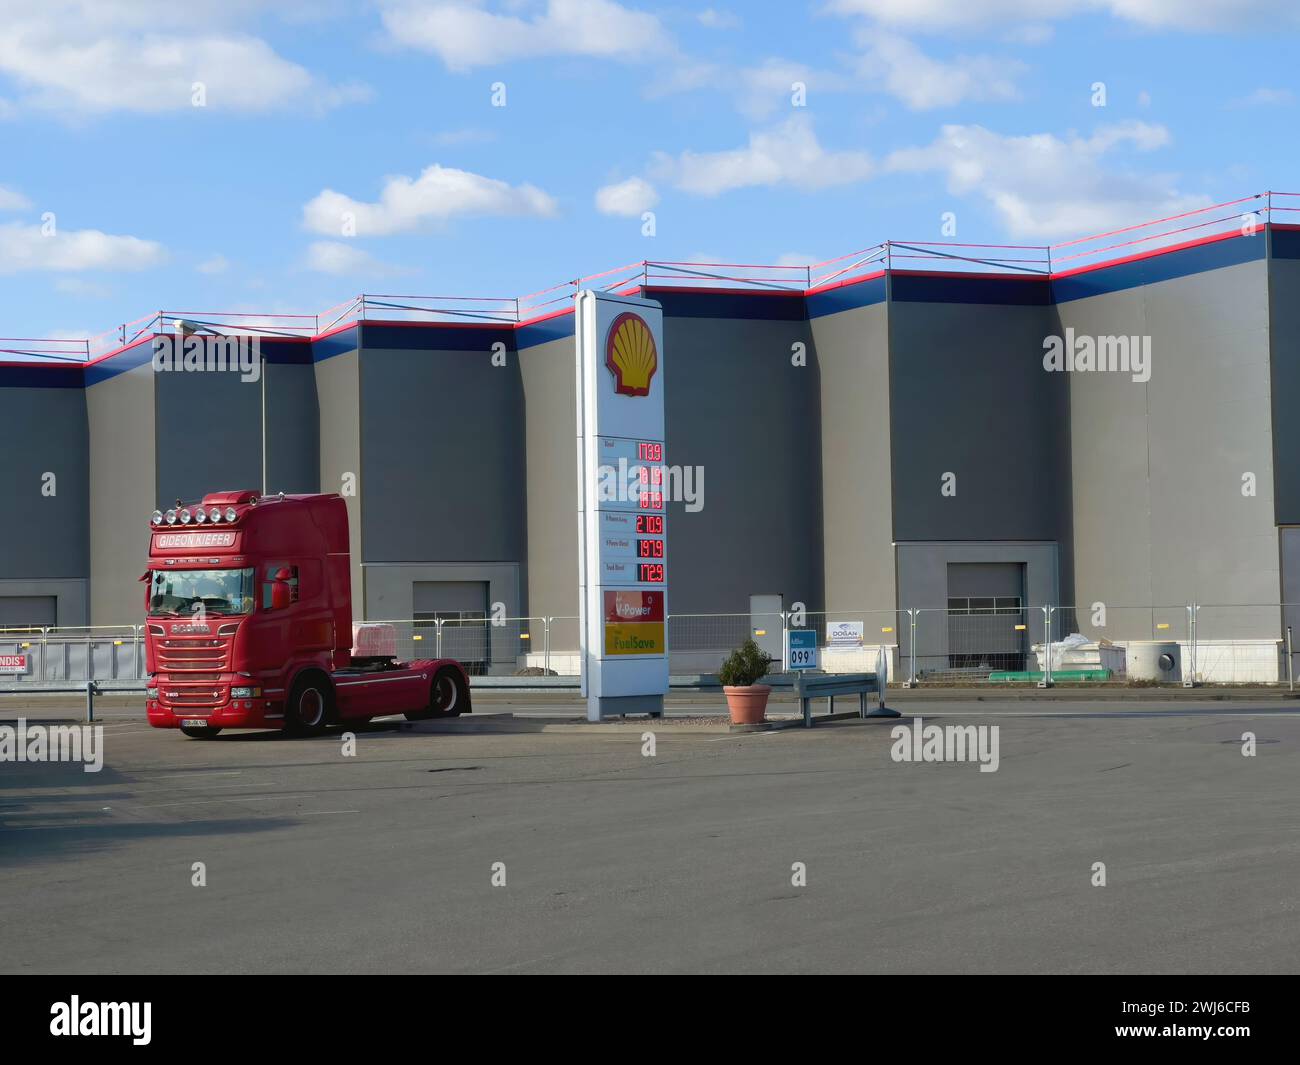 Hamburg, Germany - Feb 26, 2022: View of Scania R500 truck parked near Shell gas station with prices indicated and large warehouse transportation distribution building in background Stock Photo